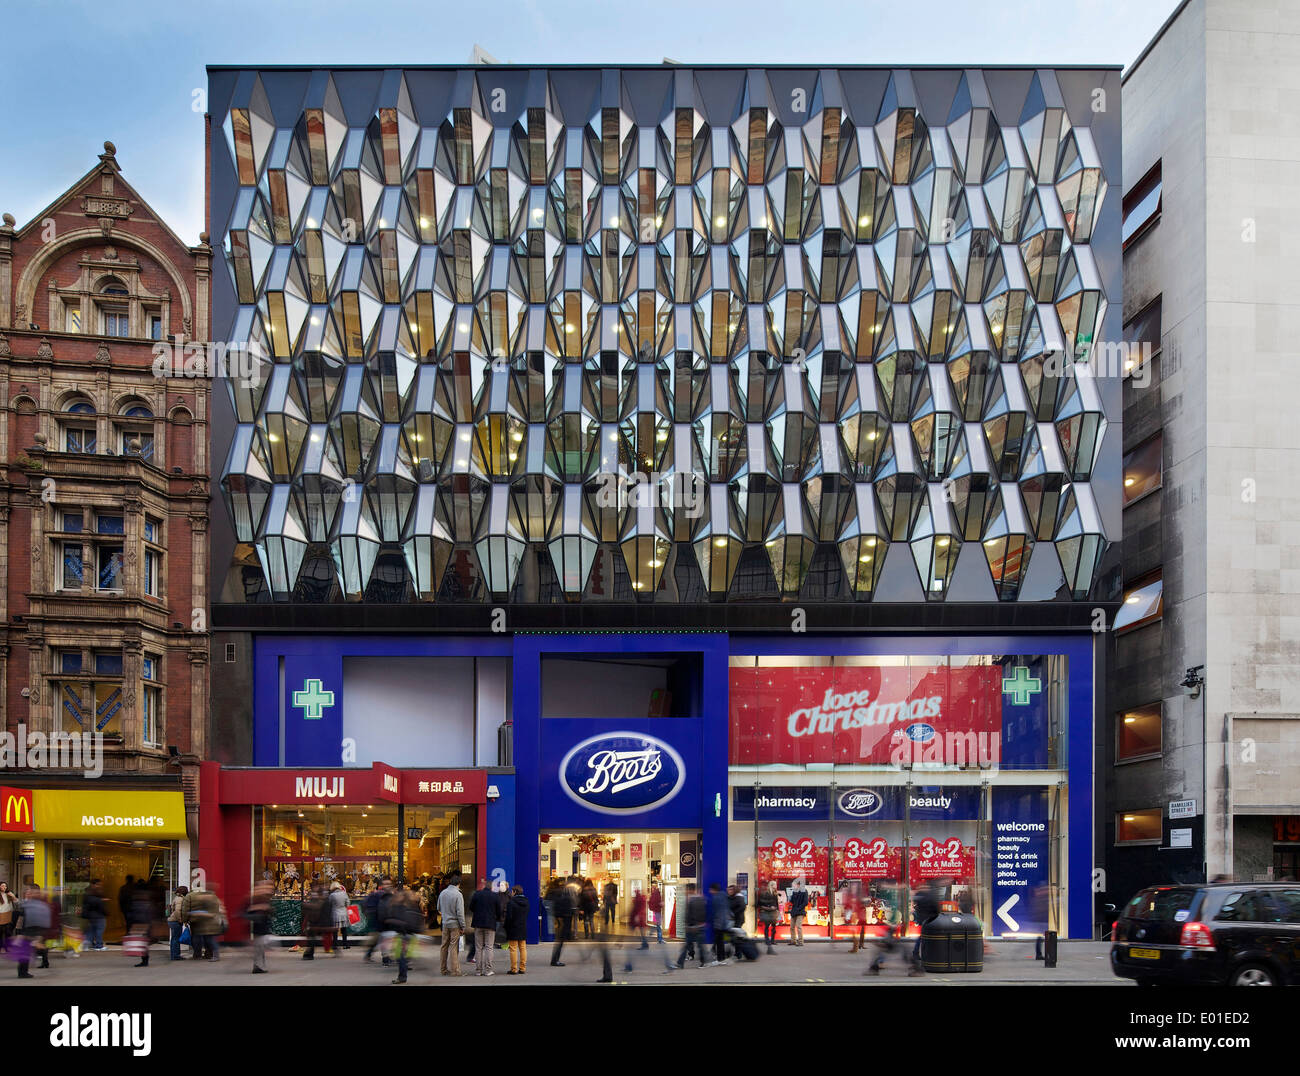 New Boots store in Oxford St London, by JM Scully Stock Photo